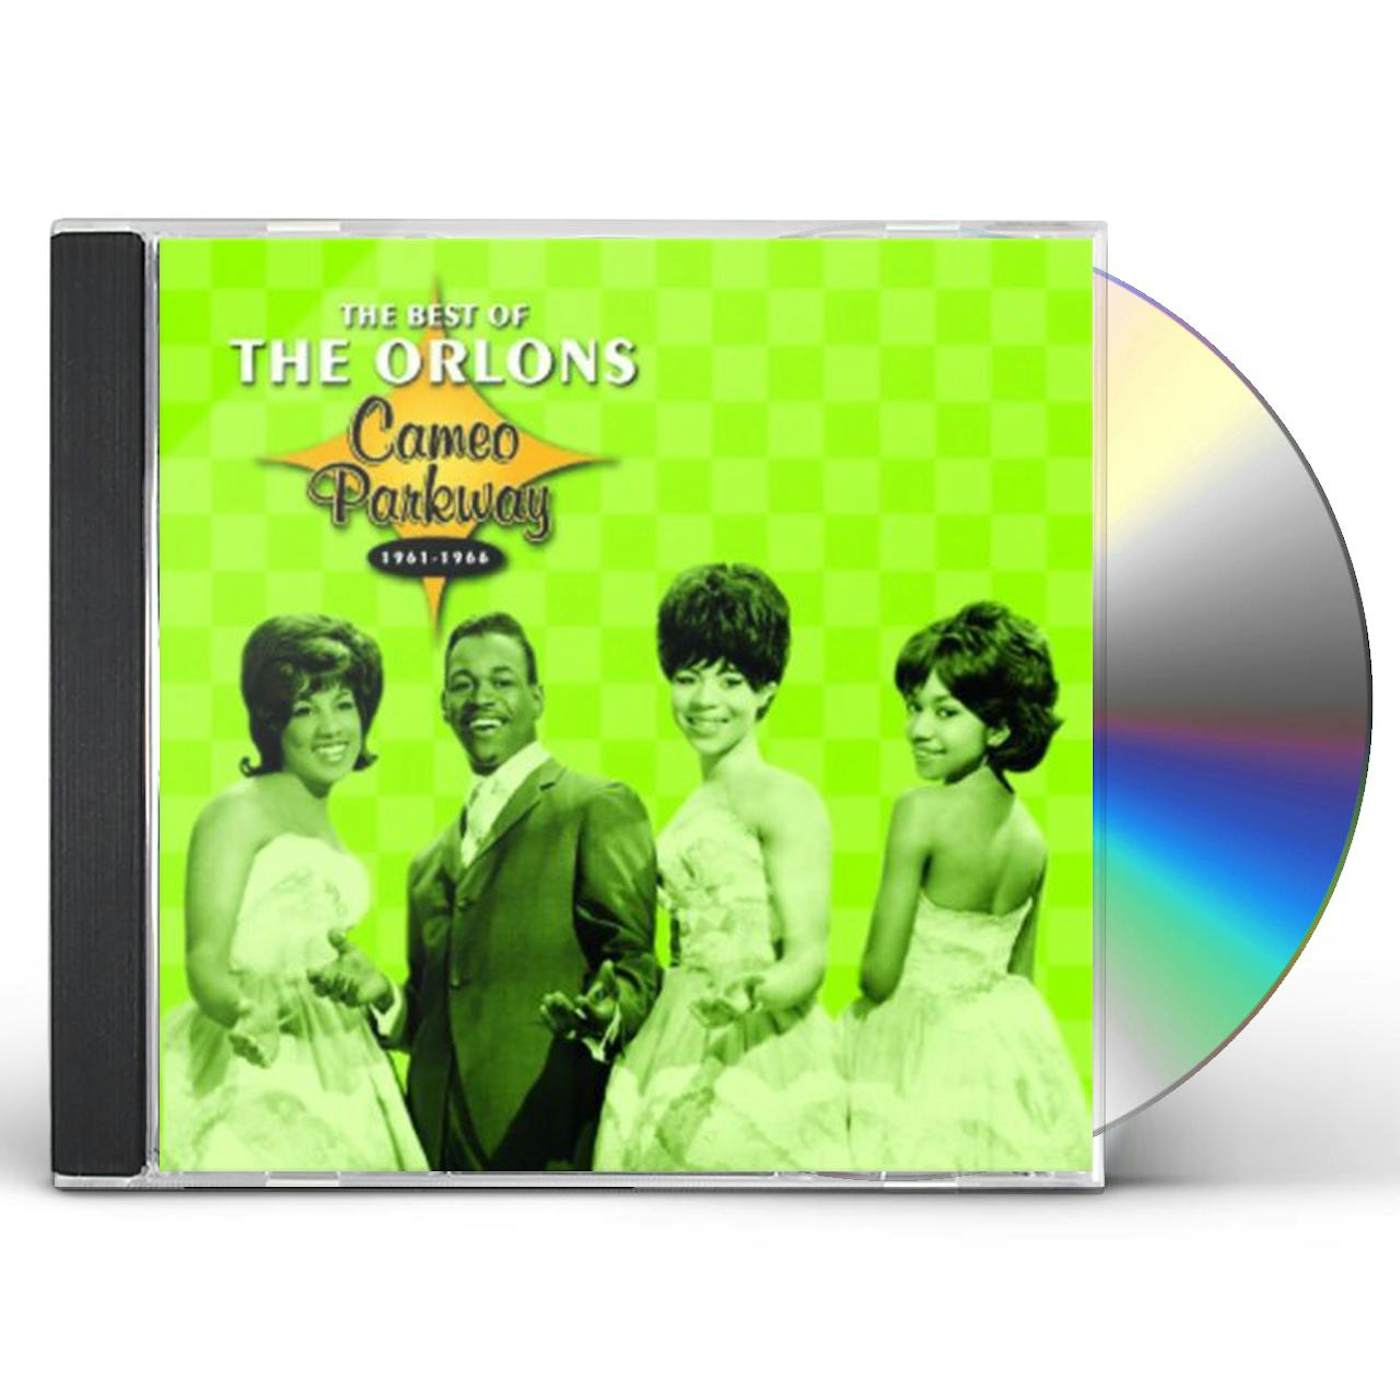 The Orlons BEST OF 1961-1966 CD